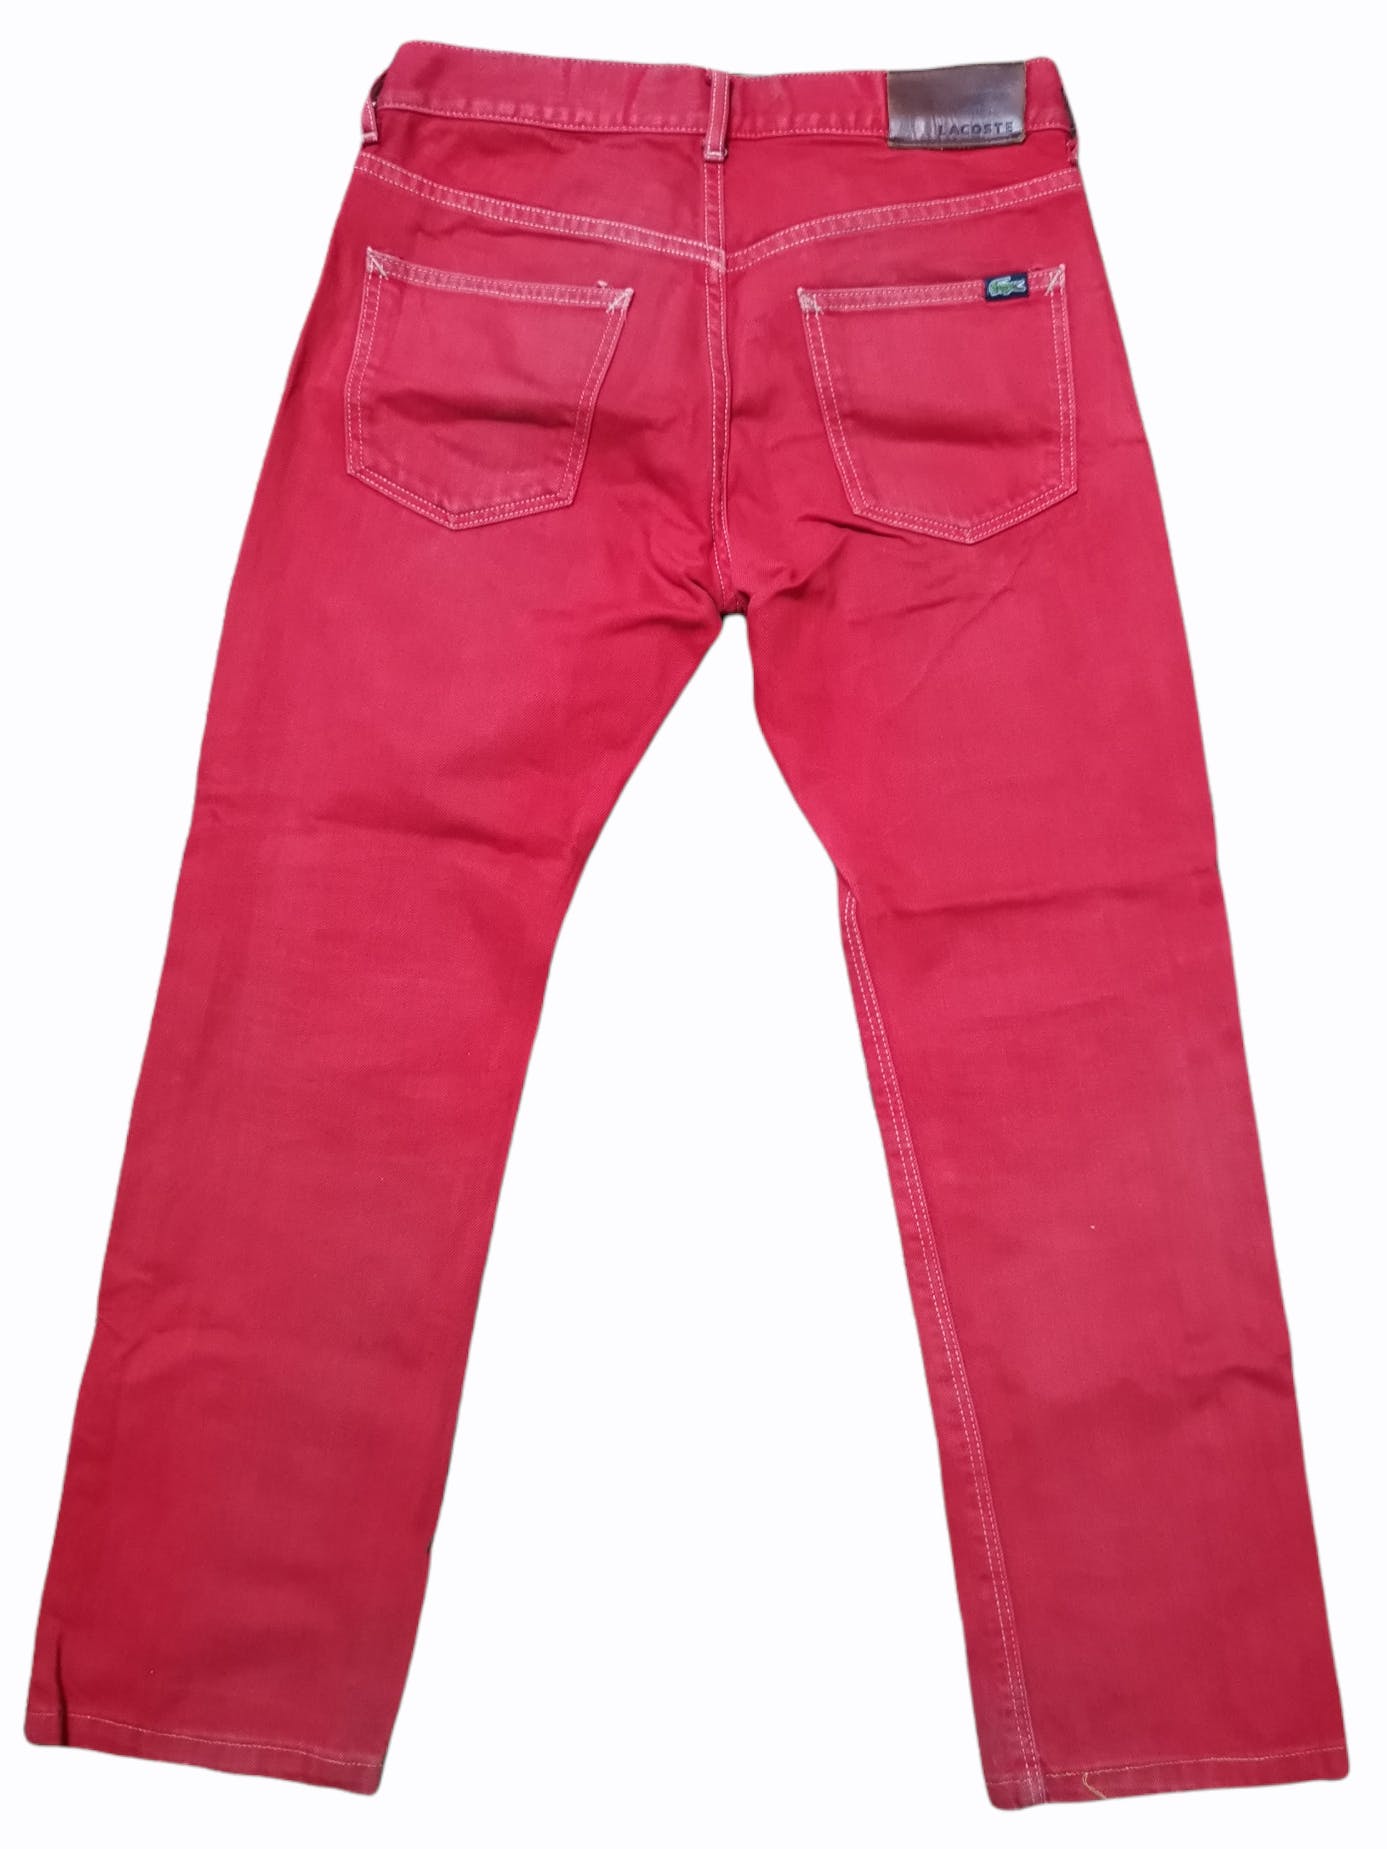 Lacoste Dirty Red Denim - 2